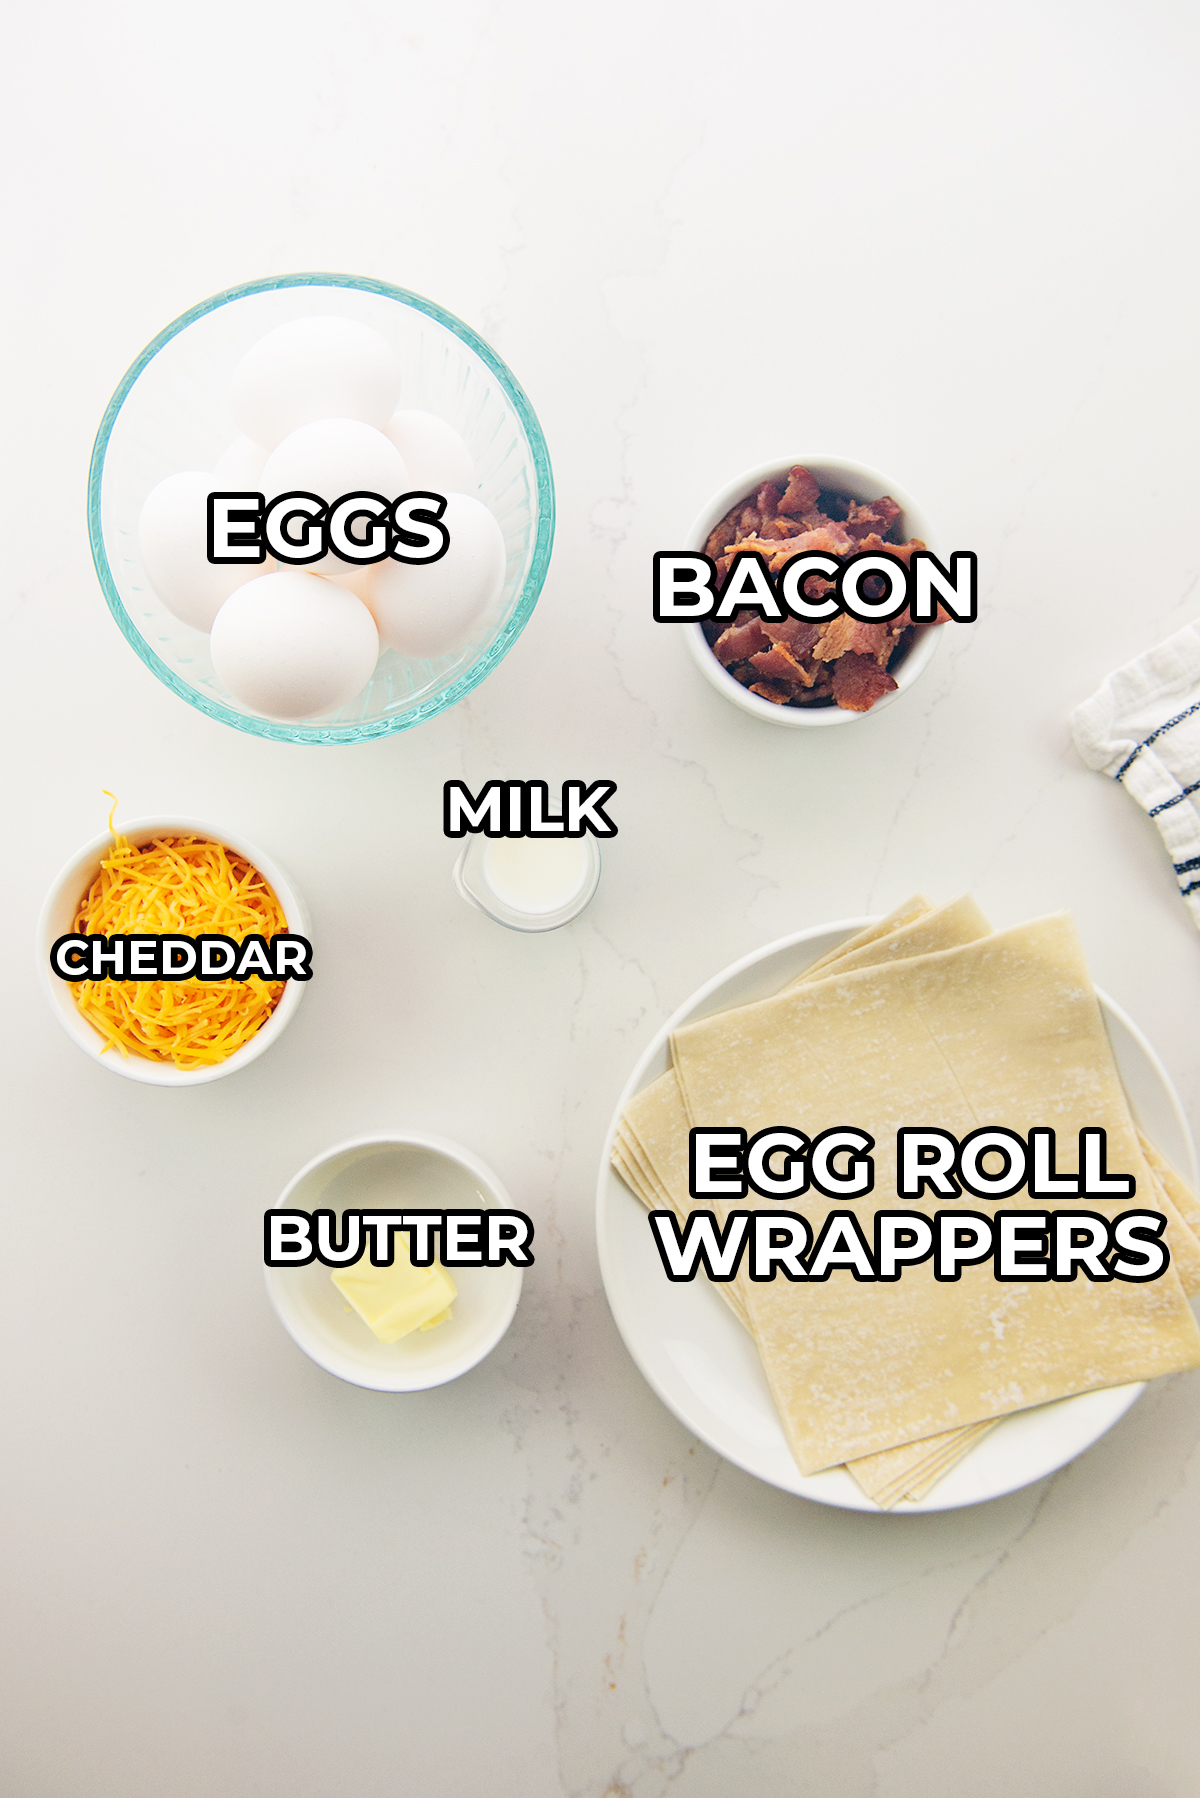 breakfast egg roll ingredients spread out on a countertop.